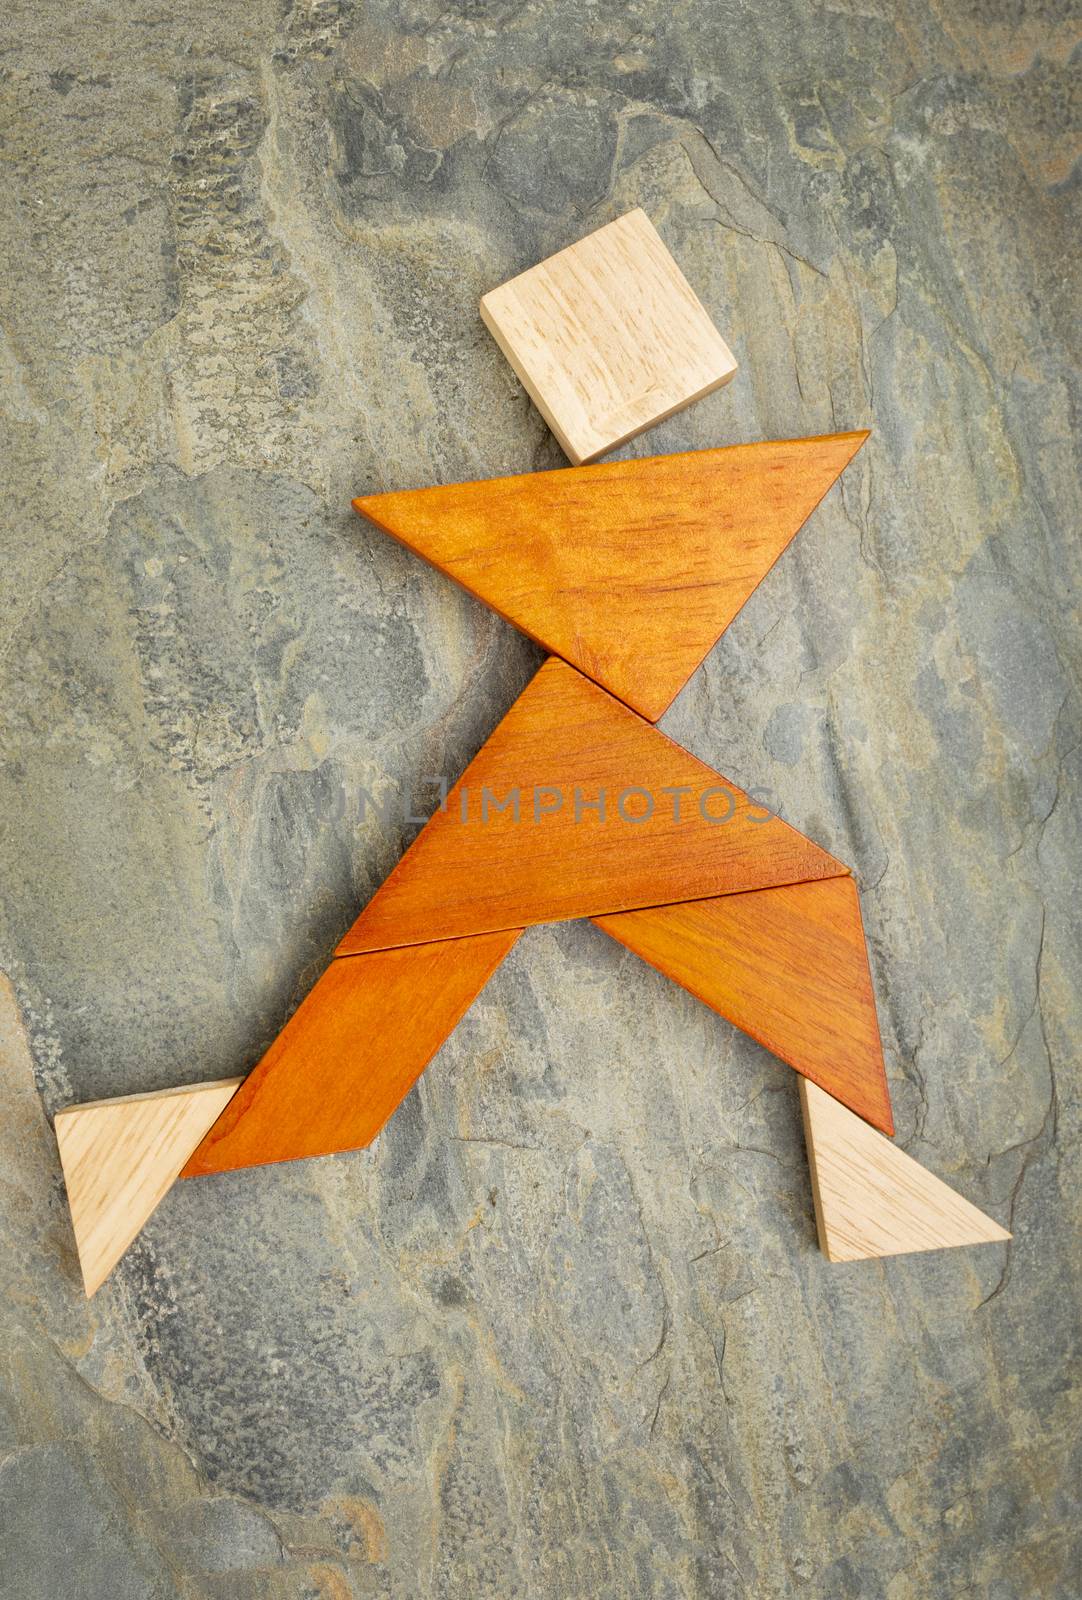 abstract of a dancing, running or walking figure built from seven tangram puzzle wooden pieces,, the artwork copyright by the photographer